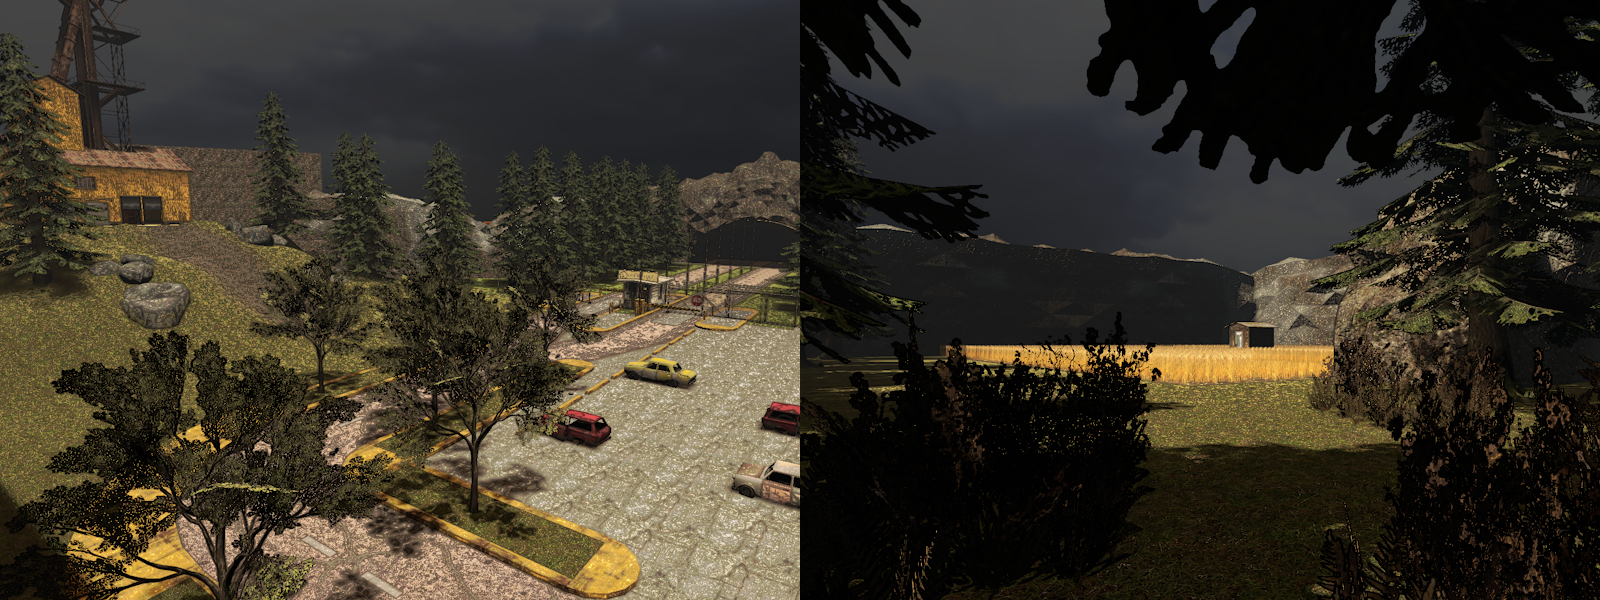 pictures of the lethal aperture portal moon showing the trees and parking lot on the left and the wheat field on the right